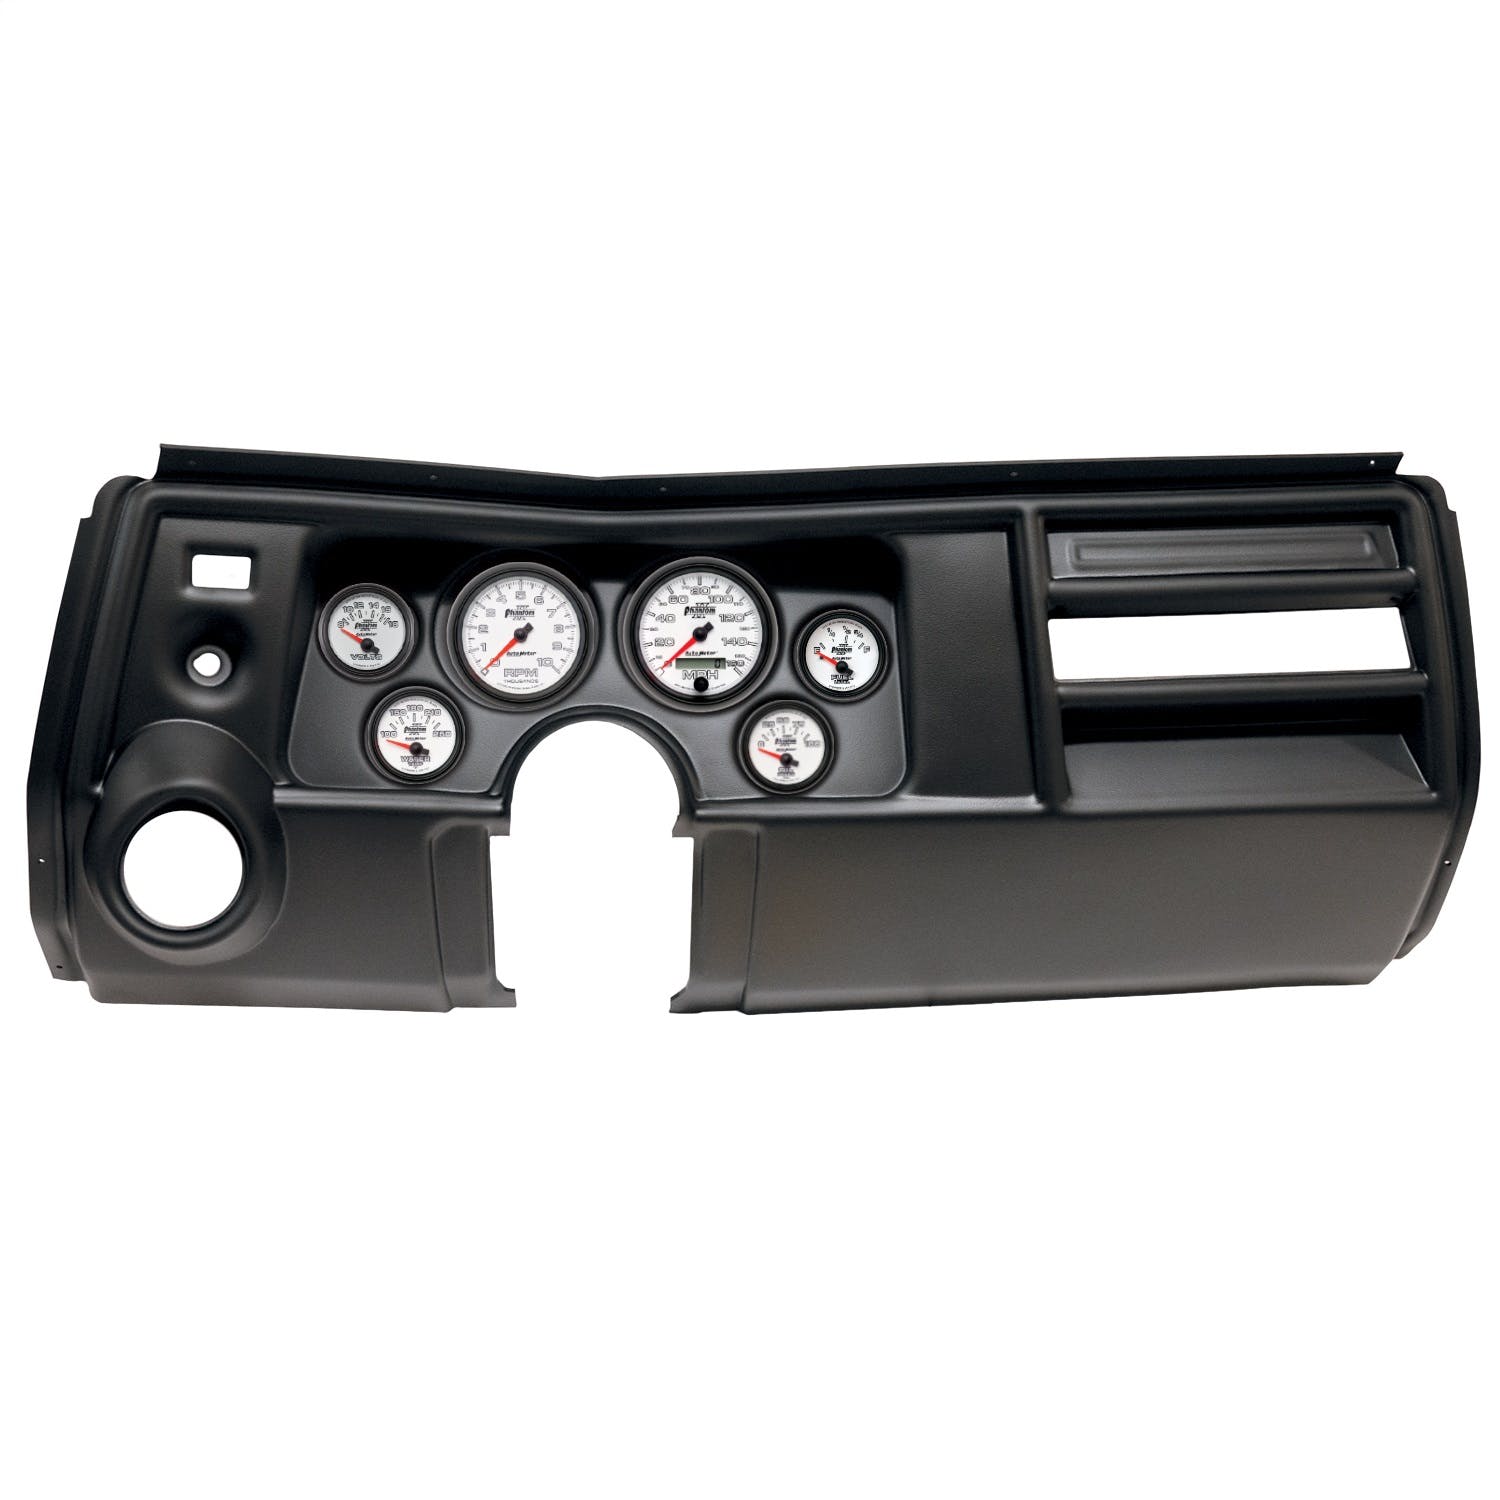 AutoMeter Products 2909-10 6 Gauge Direct-Fit Dash Kit, Chevy Chevelle Vent 69, Phantom II